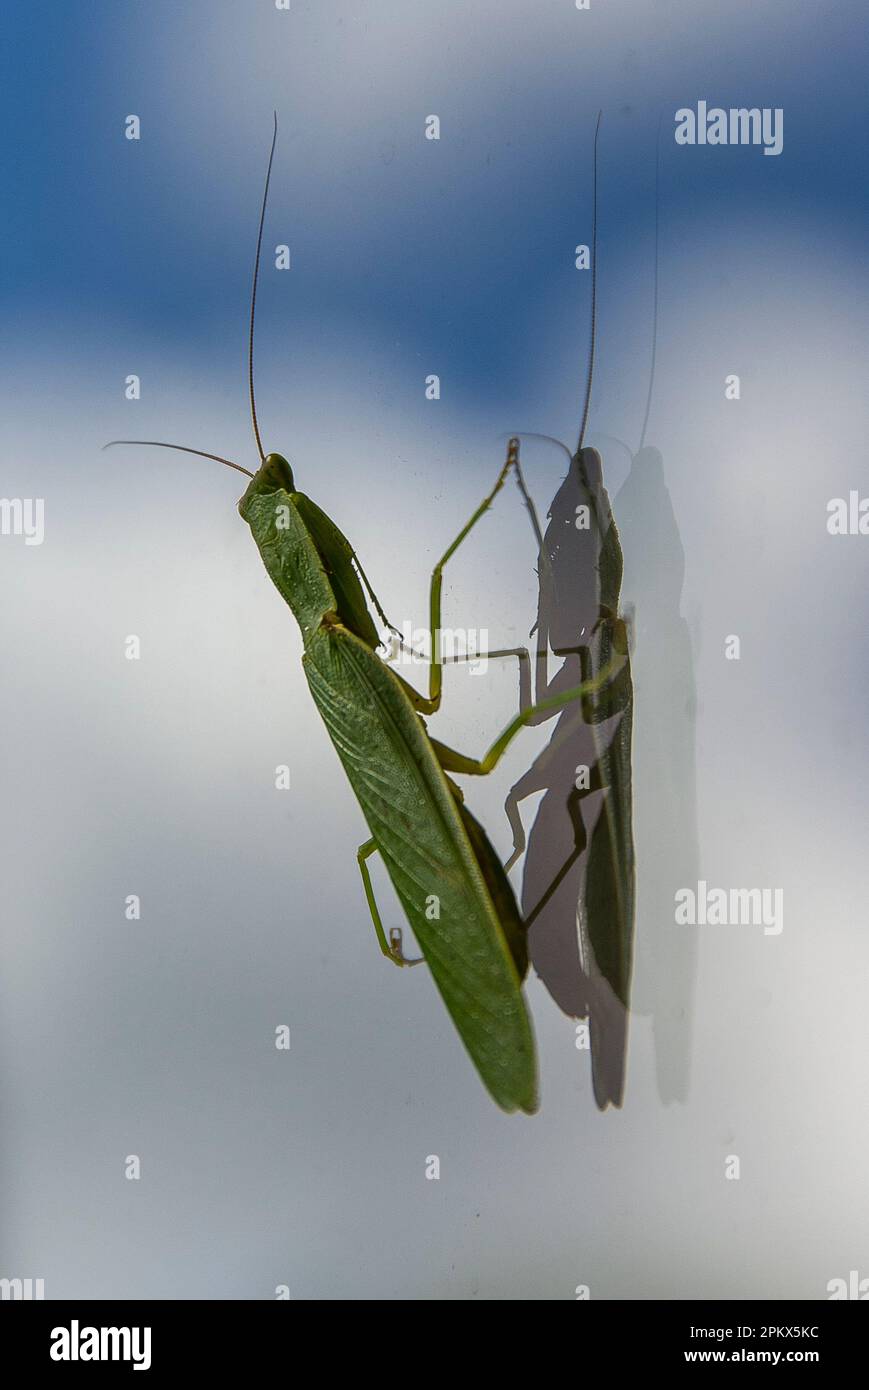 Australian Garden Praying Mantid, Orthodera ministralis, and its reflection on a window on a Queensland window. Green insect that keeps very still. Stock Photo